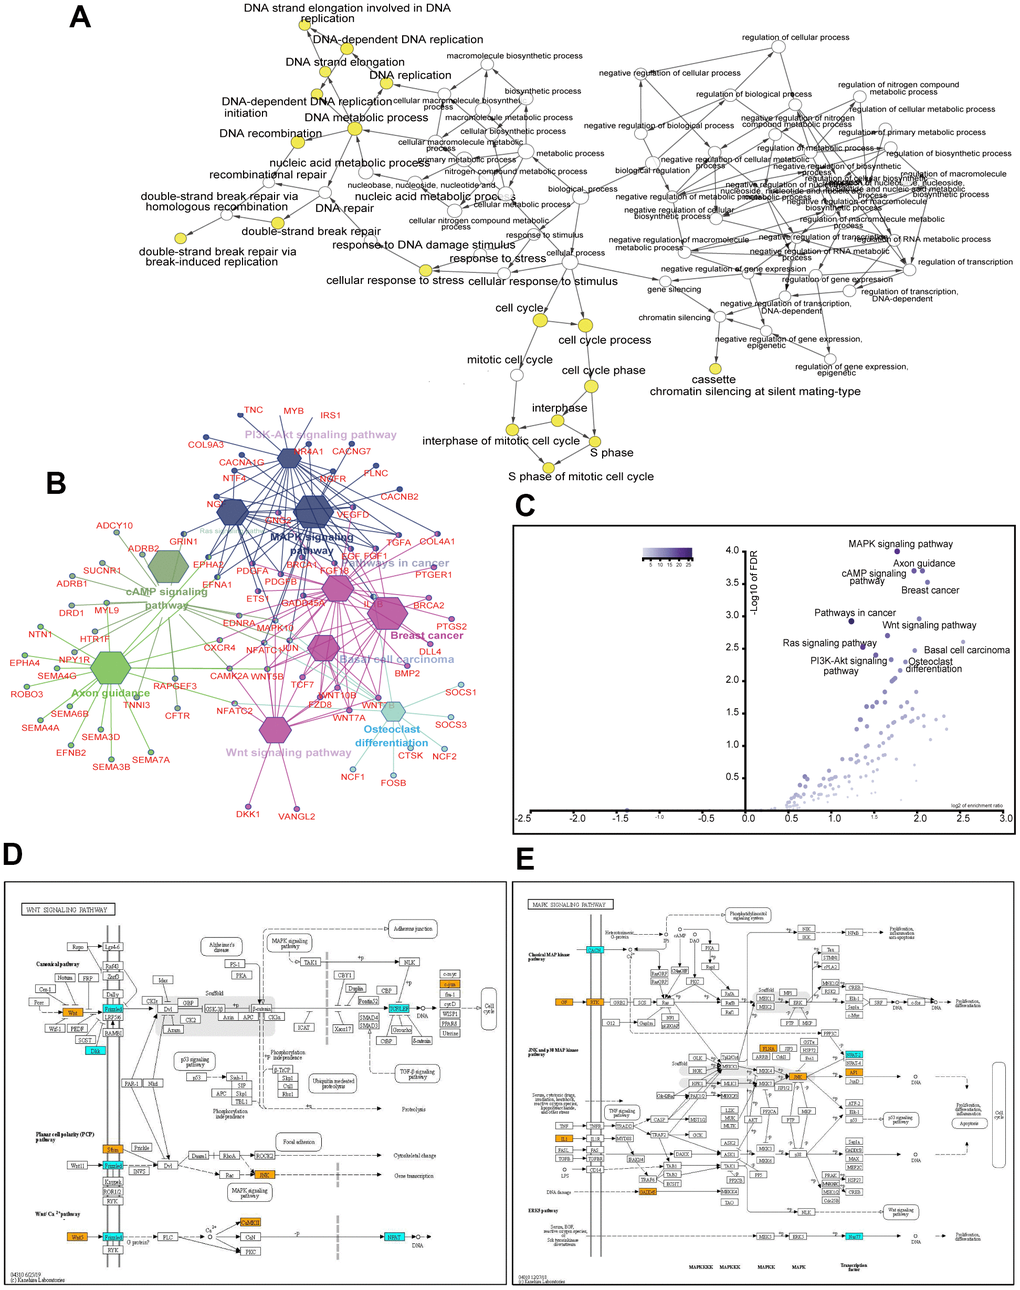 Analysis of 219 hub genes with degree ≥10. GO biological process analysis using the BinGo plug-in of Cytoscape (A). KEGG pathway analysis using the ClueGo plug-in of Cytoscape (B). Volcano plot of the enriched pathways with P values and enrichment scores (C). Altered genes in the Wnt signaling pathway (D). Altered genes in the MAPK signaling pathway (E). Orange and cyan rectangles indicate the upregulation and downregulation of genes, respectively, after the ACK1 gene knockdown. Only DEGs (fold change ≥2 and adjusted P value 